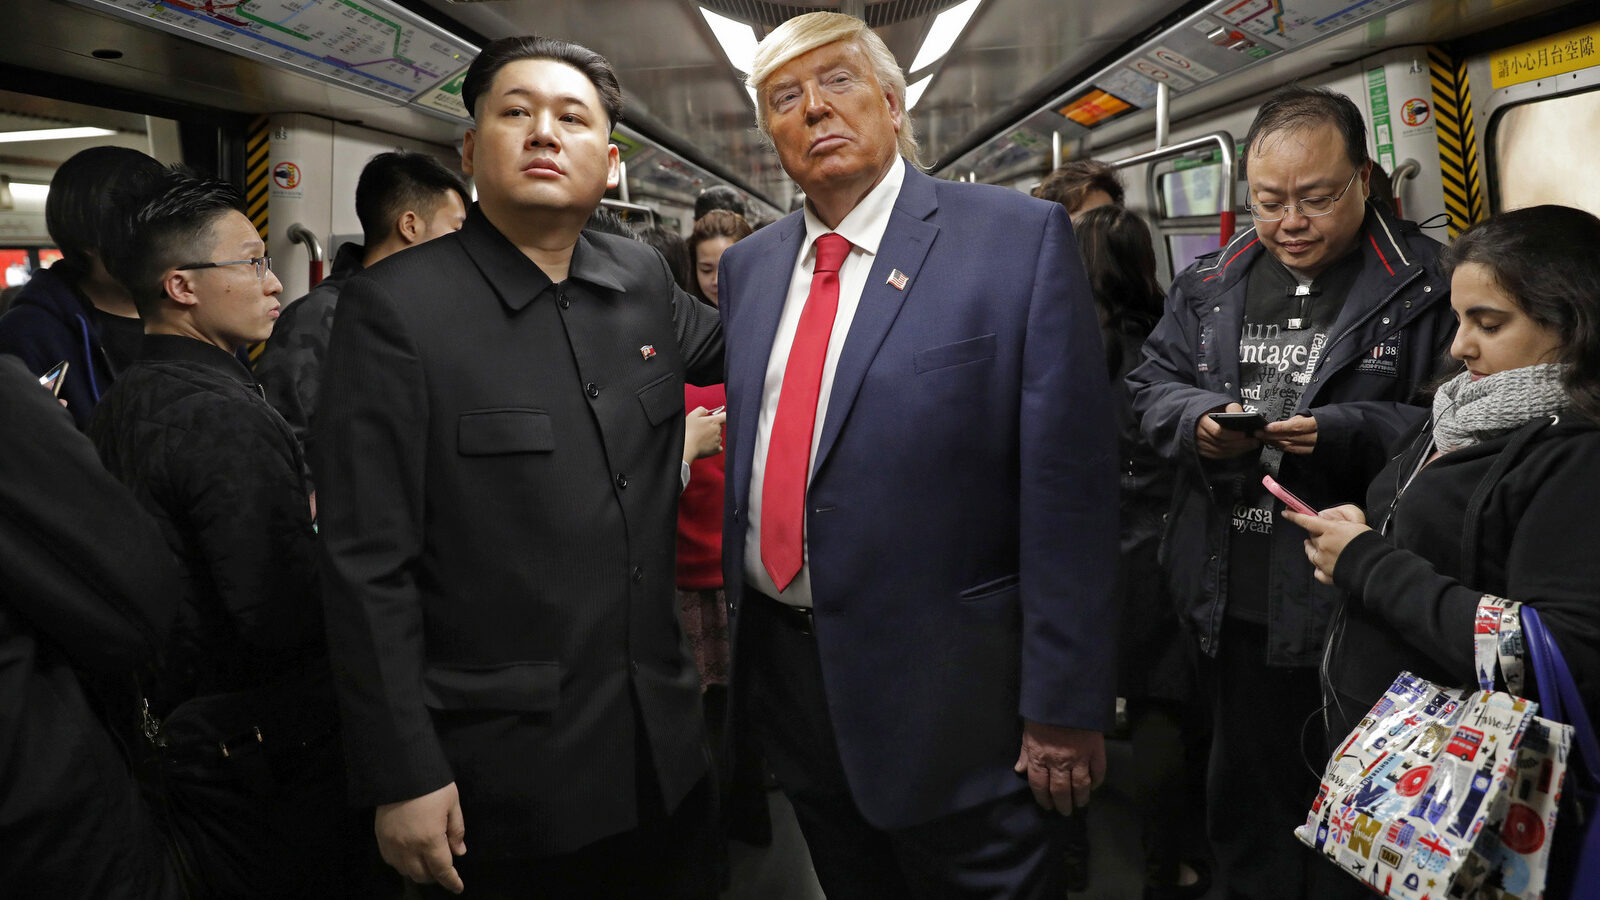 Kim Jong Un and Donald Trump impersonators, Howard, left, and Dennis, right, (who only give their first name) stand side by side on a train to promote a music video they created in Hong Kong, Wednesday, Jan. 25, 2017. (AP Photo/Vincent Yu)